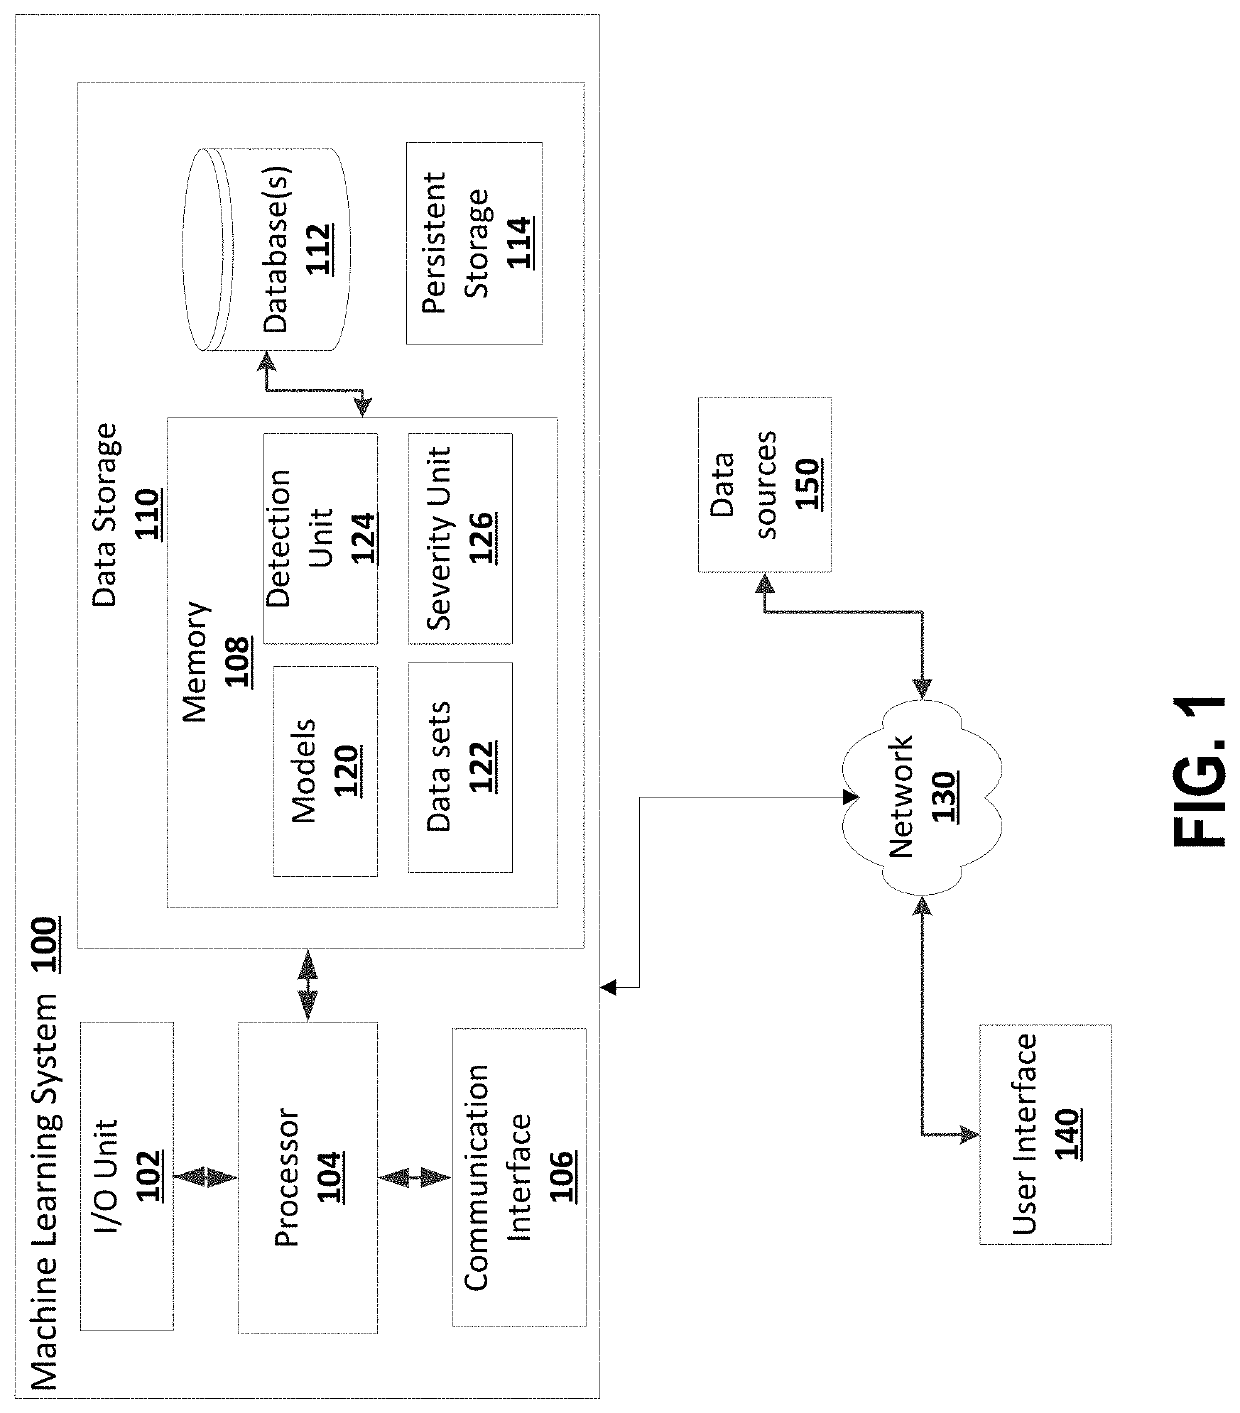 System and method for adverse event detection or severity estimation from surgical data